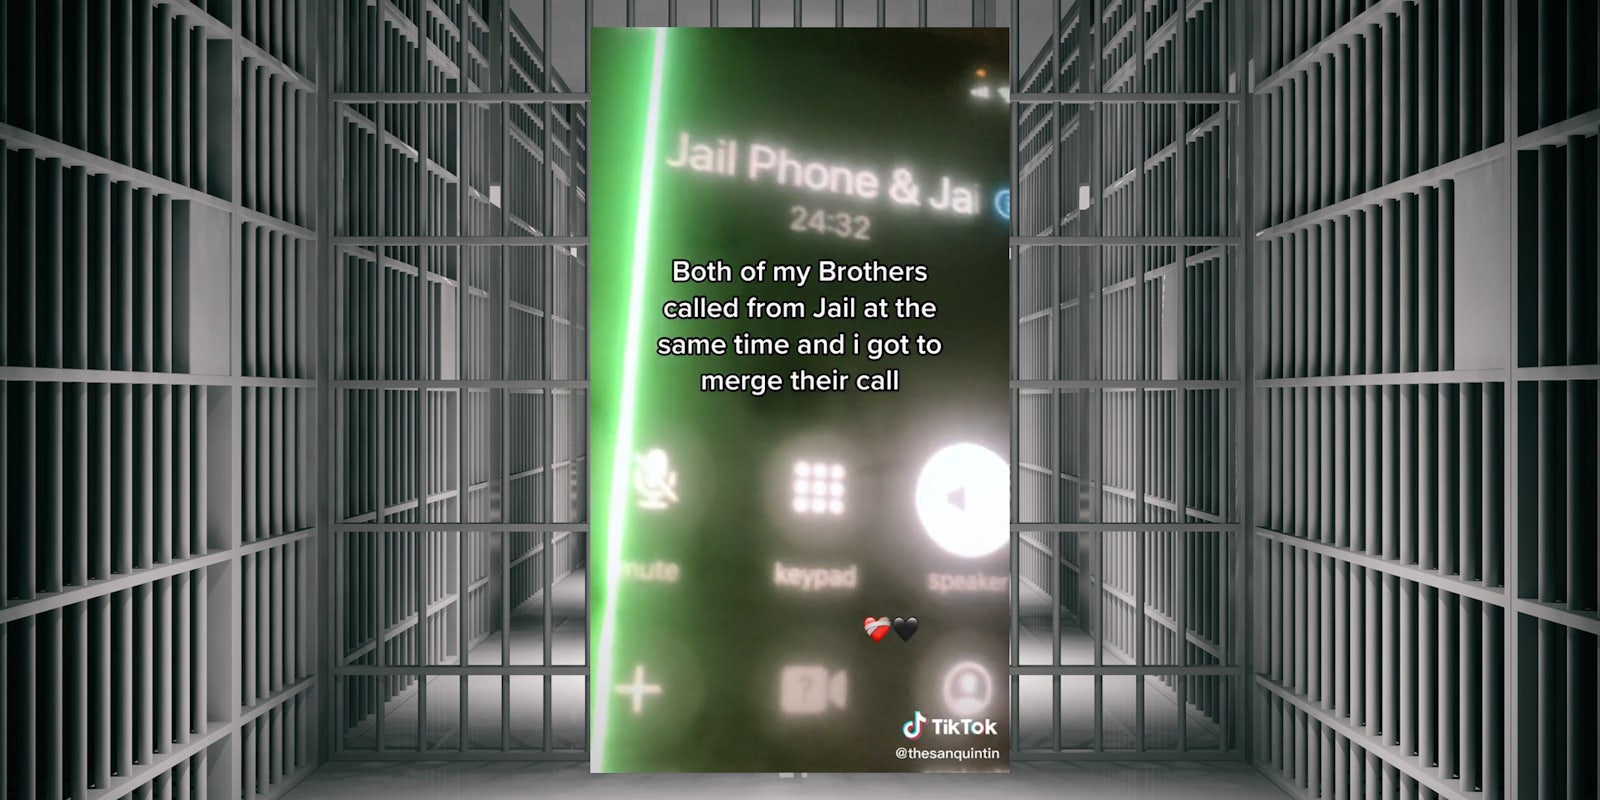 prison with inset of Jail Phone & Jail Phone on phone call, caption 'Both of my brothers called from jail at the same time and i got to merge their call'